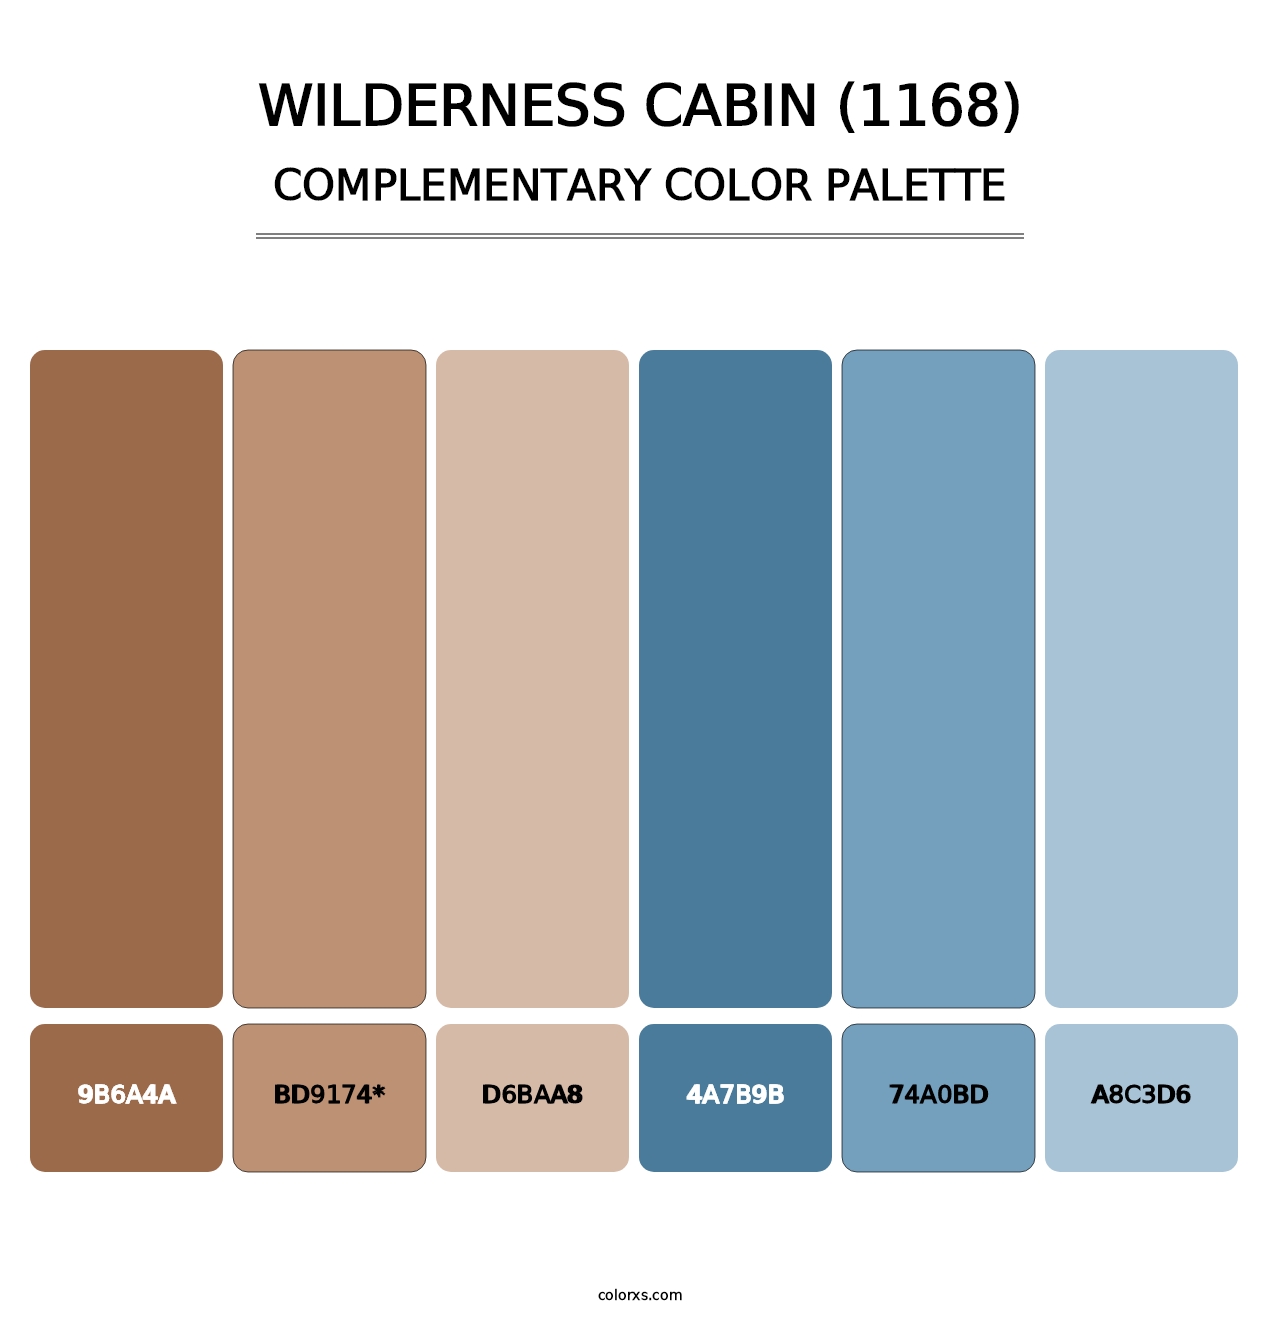 Wilderness Cabin (1168) - Complementary Color Palette